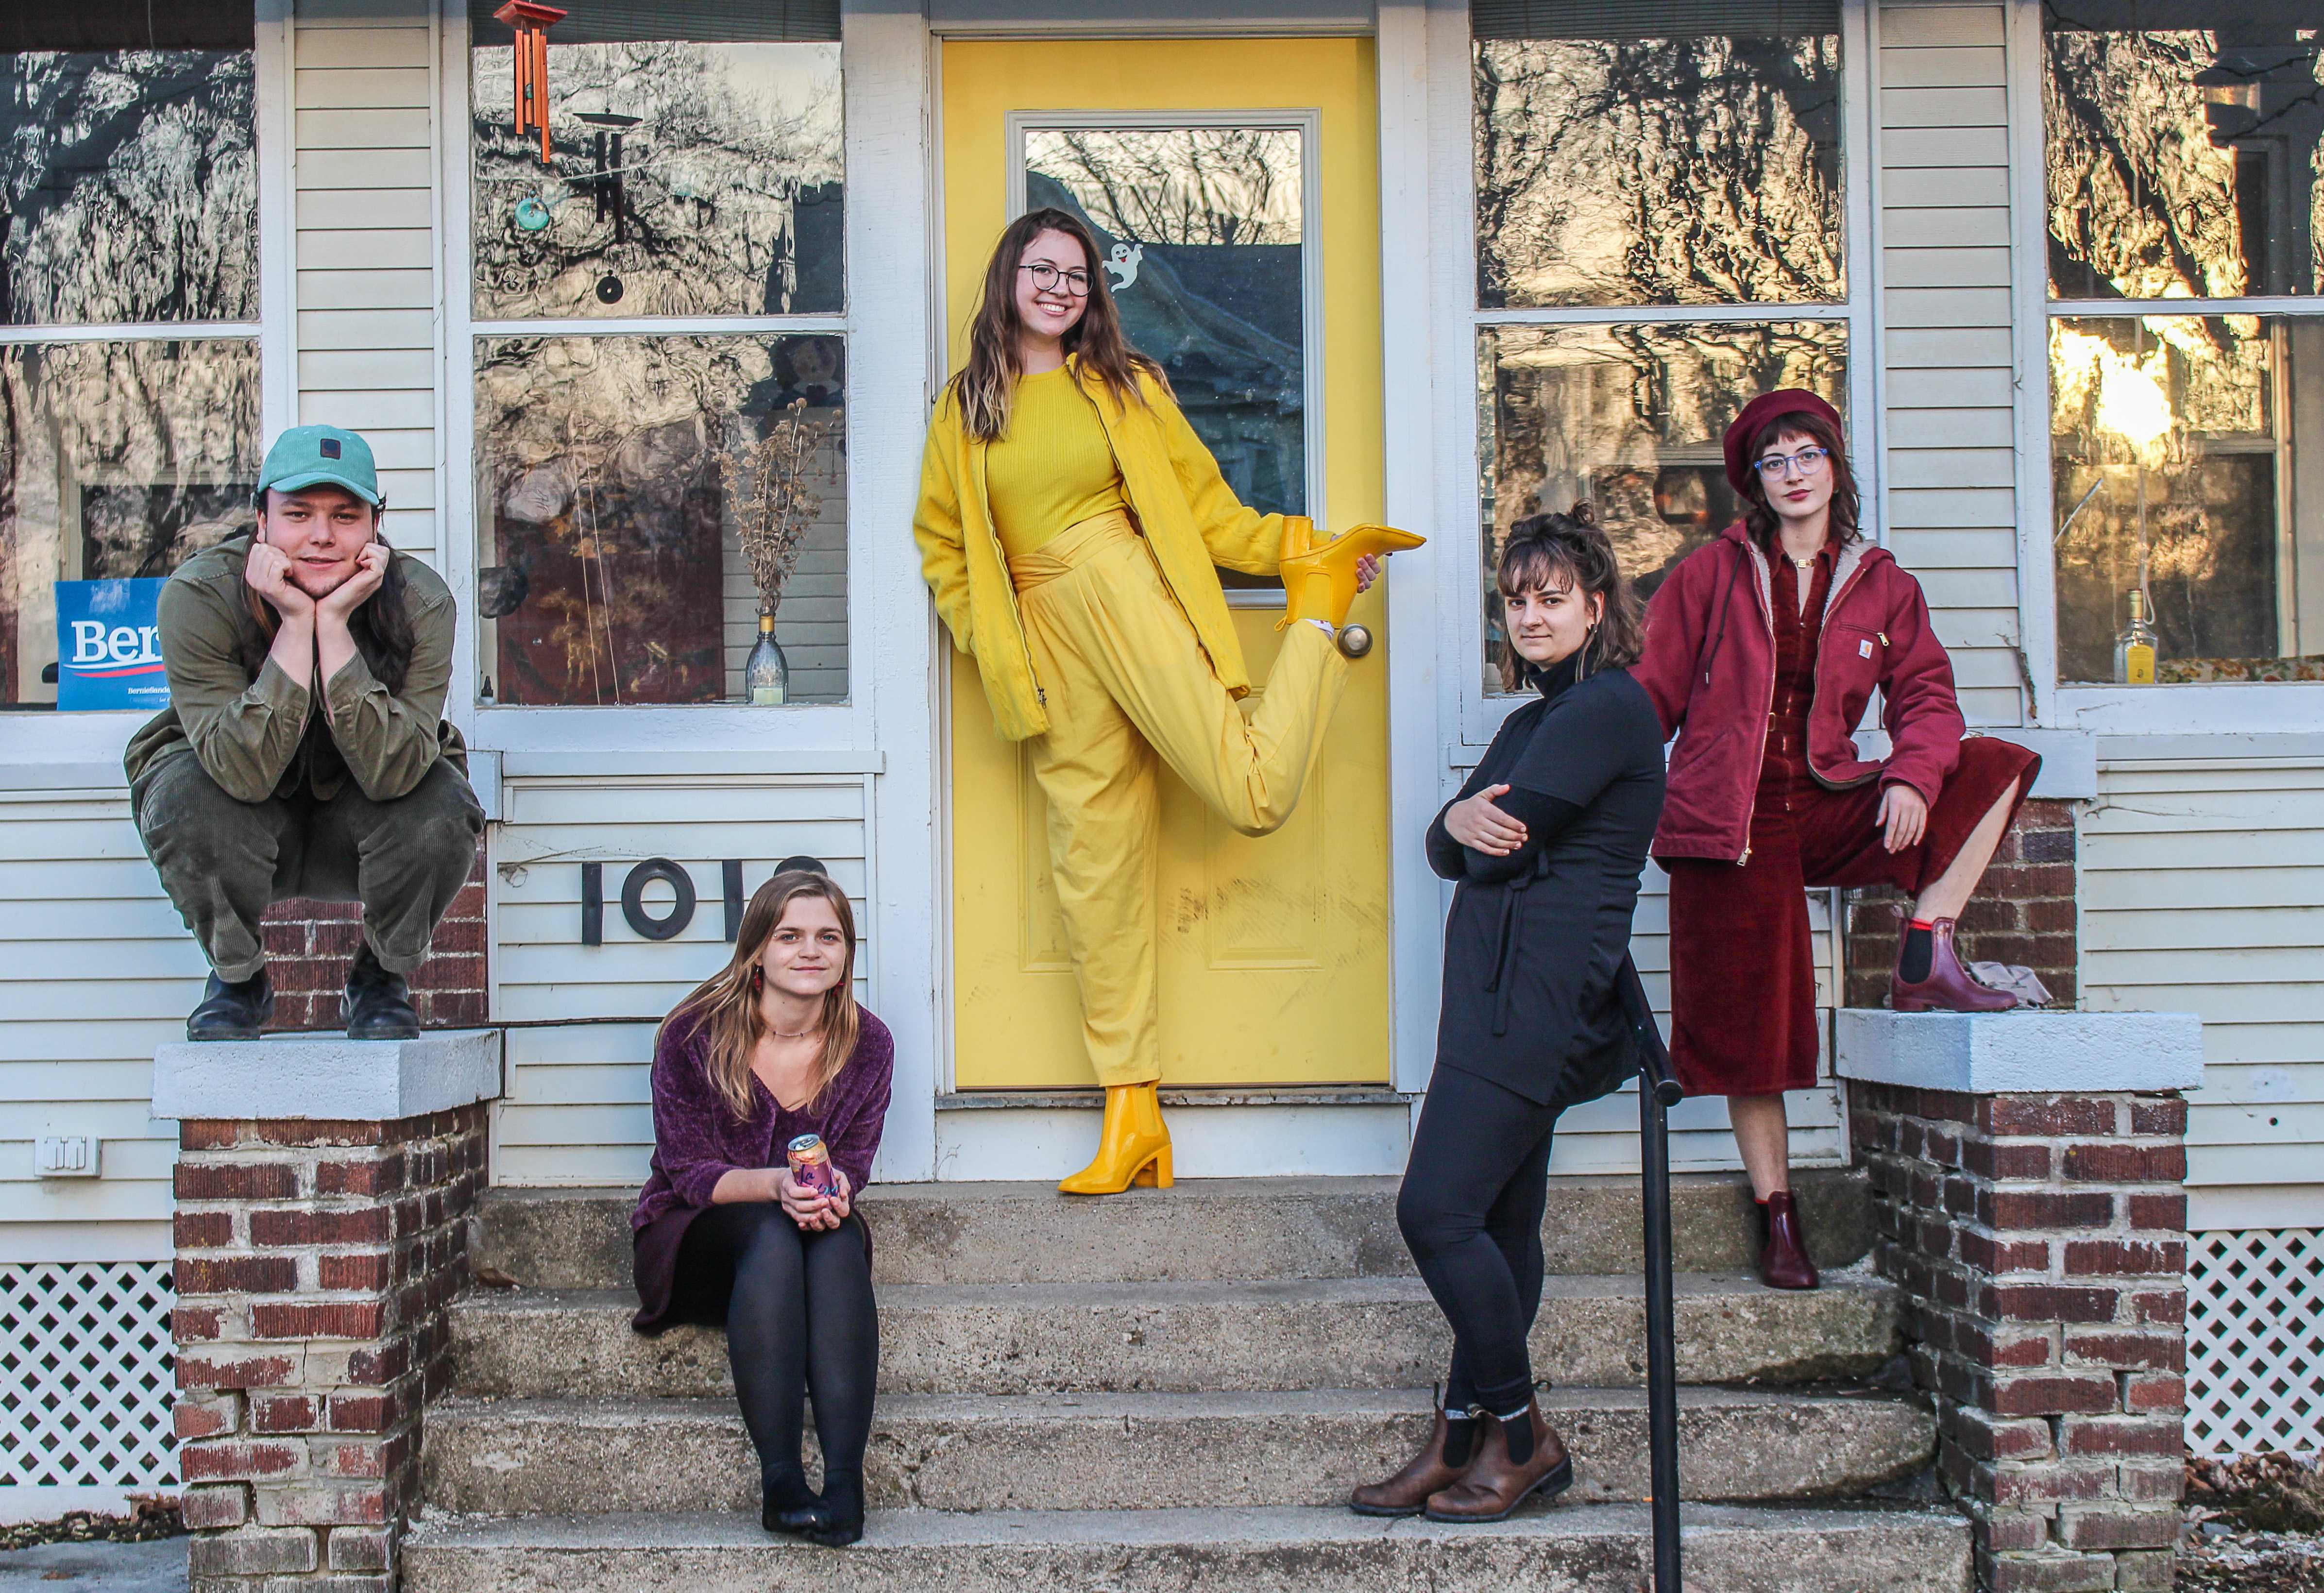 Nate Williams ‘20, Francess Dunbar ‘20, Audrey Boyle ‘21, Maggie Coleman ‘20 and Paige Oamek ‘20 spend their
days at 1018 East cooking copious amounts of mac and cheese and throwing themed parties in the basement. Photo by Miraya Baid.  